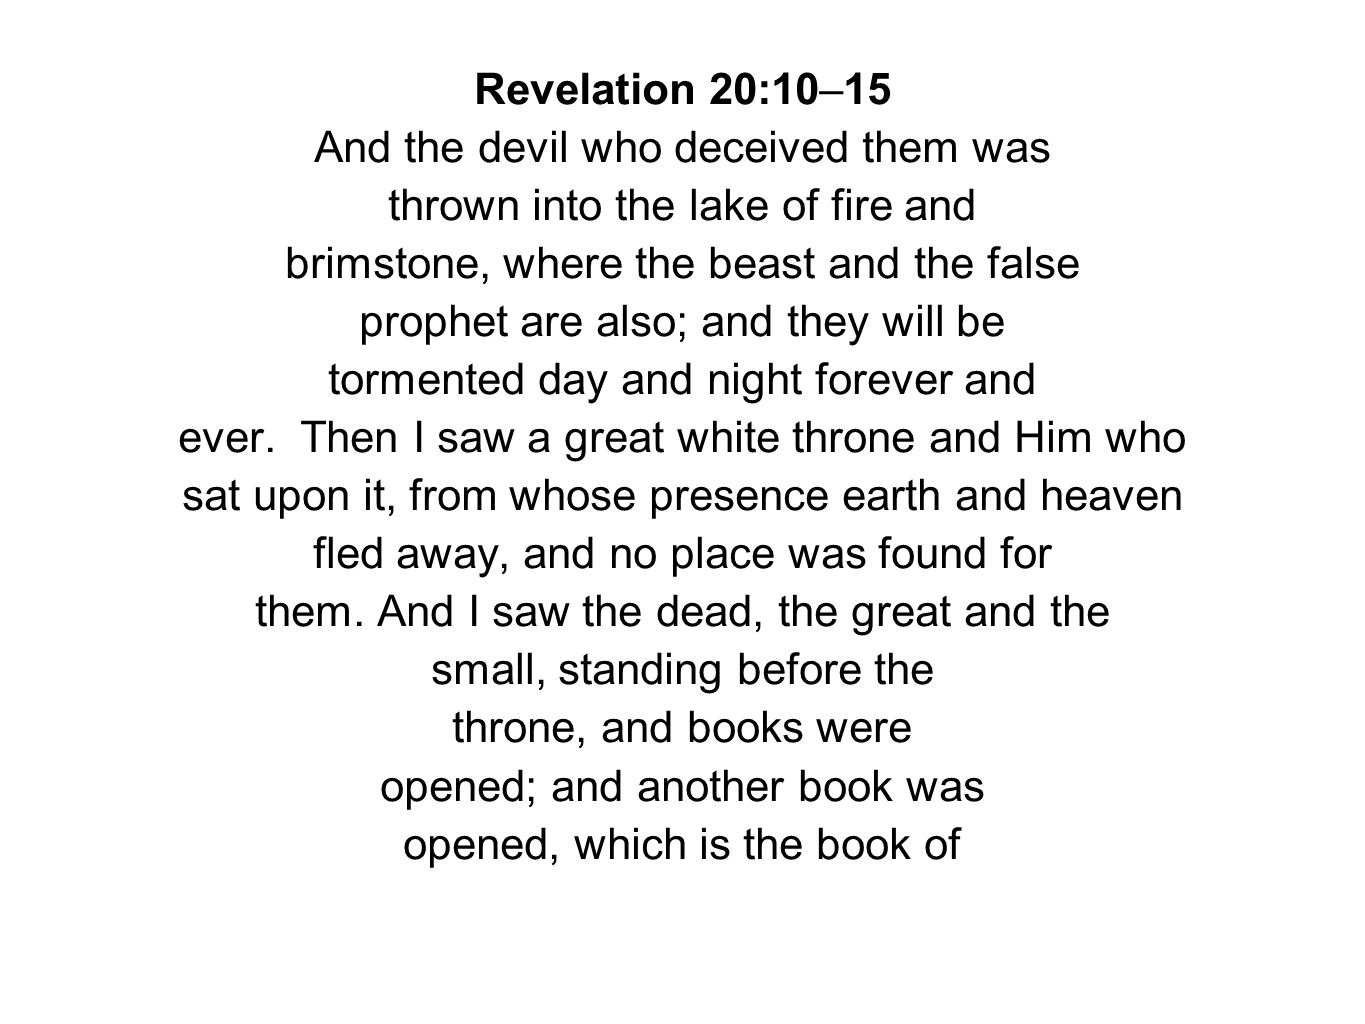 Revelation 20:10–15 And the devil who deceived them was thrown into the lake of fire and brimstone, where the beast and the false prophet are also; and they will be tormented day and night forever and ever.